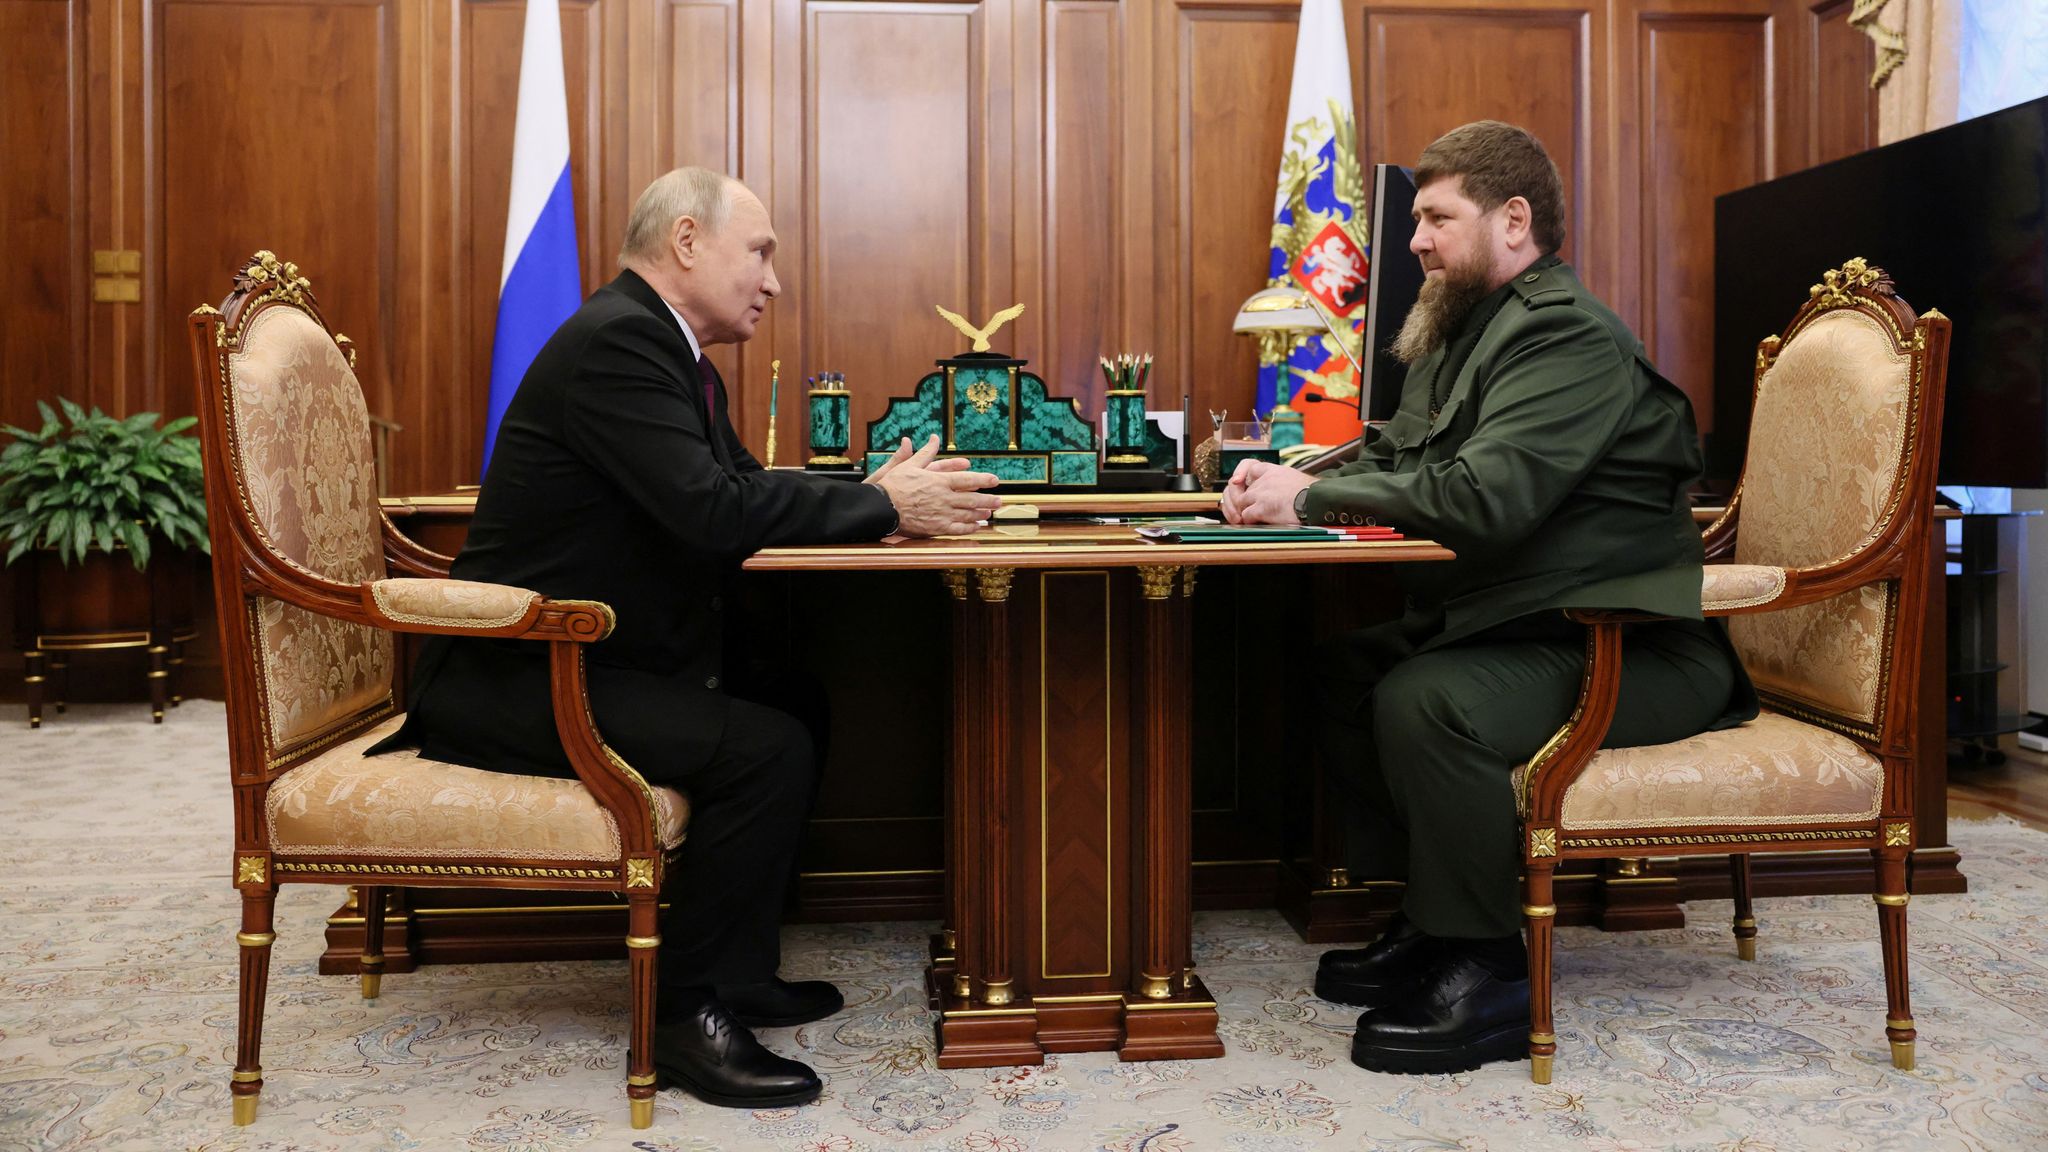 Kadyrov posted a video of himself after rumors stated that he was